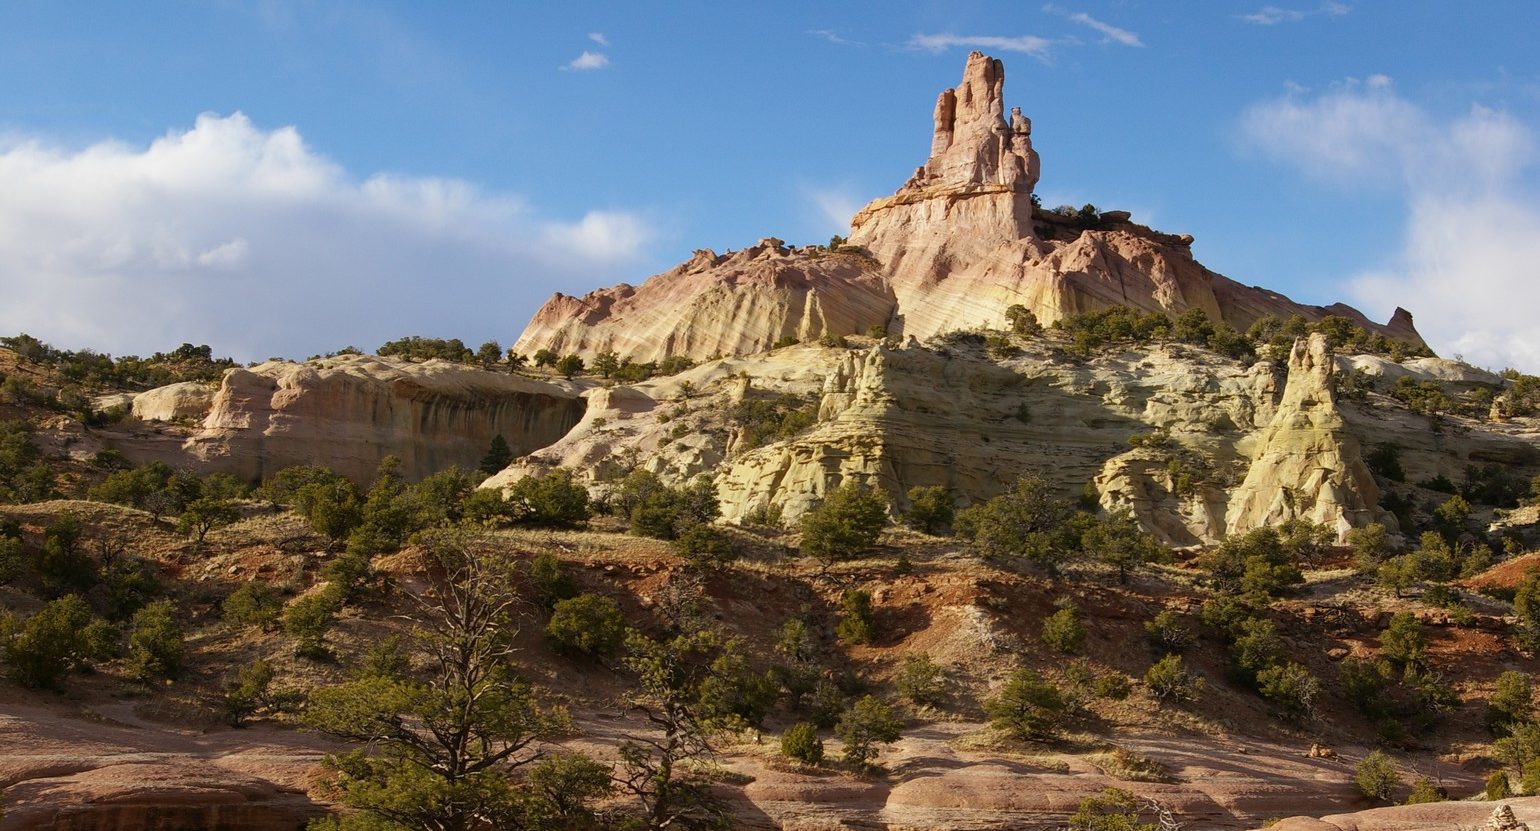 Why Red Rock Park New Mexico is a Crown Jewel?